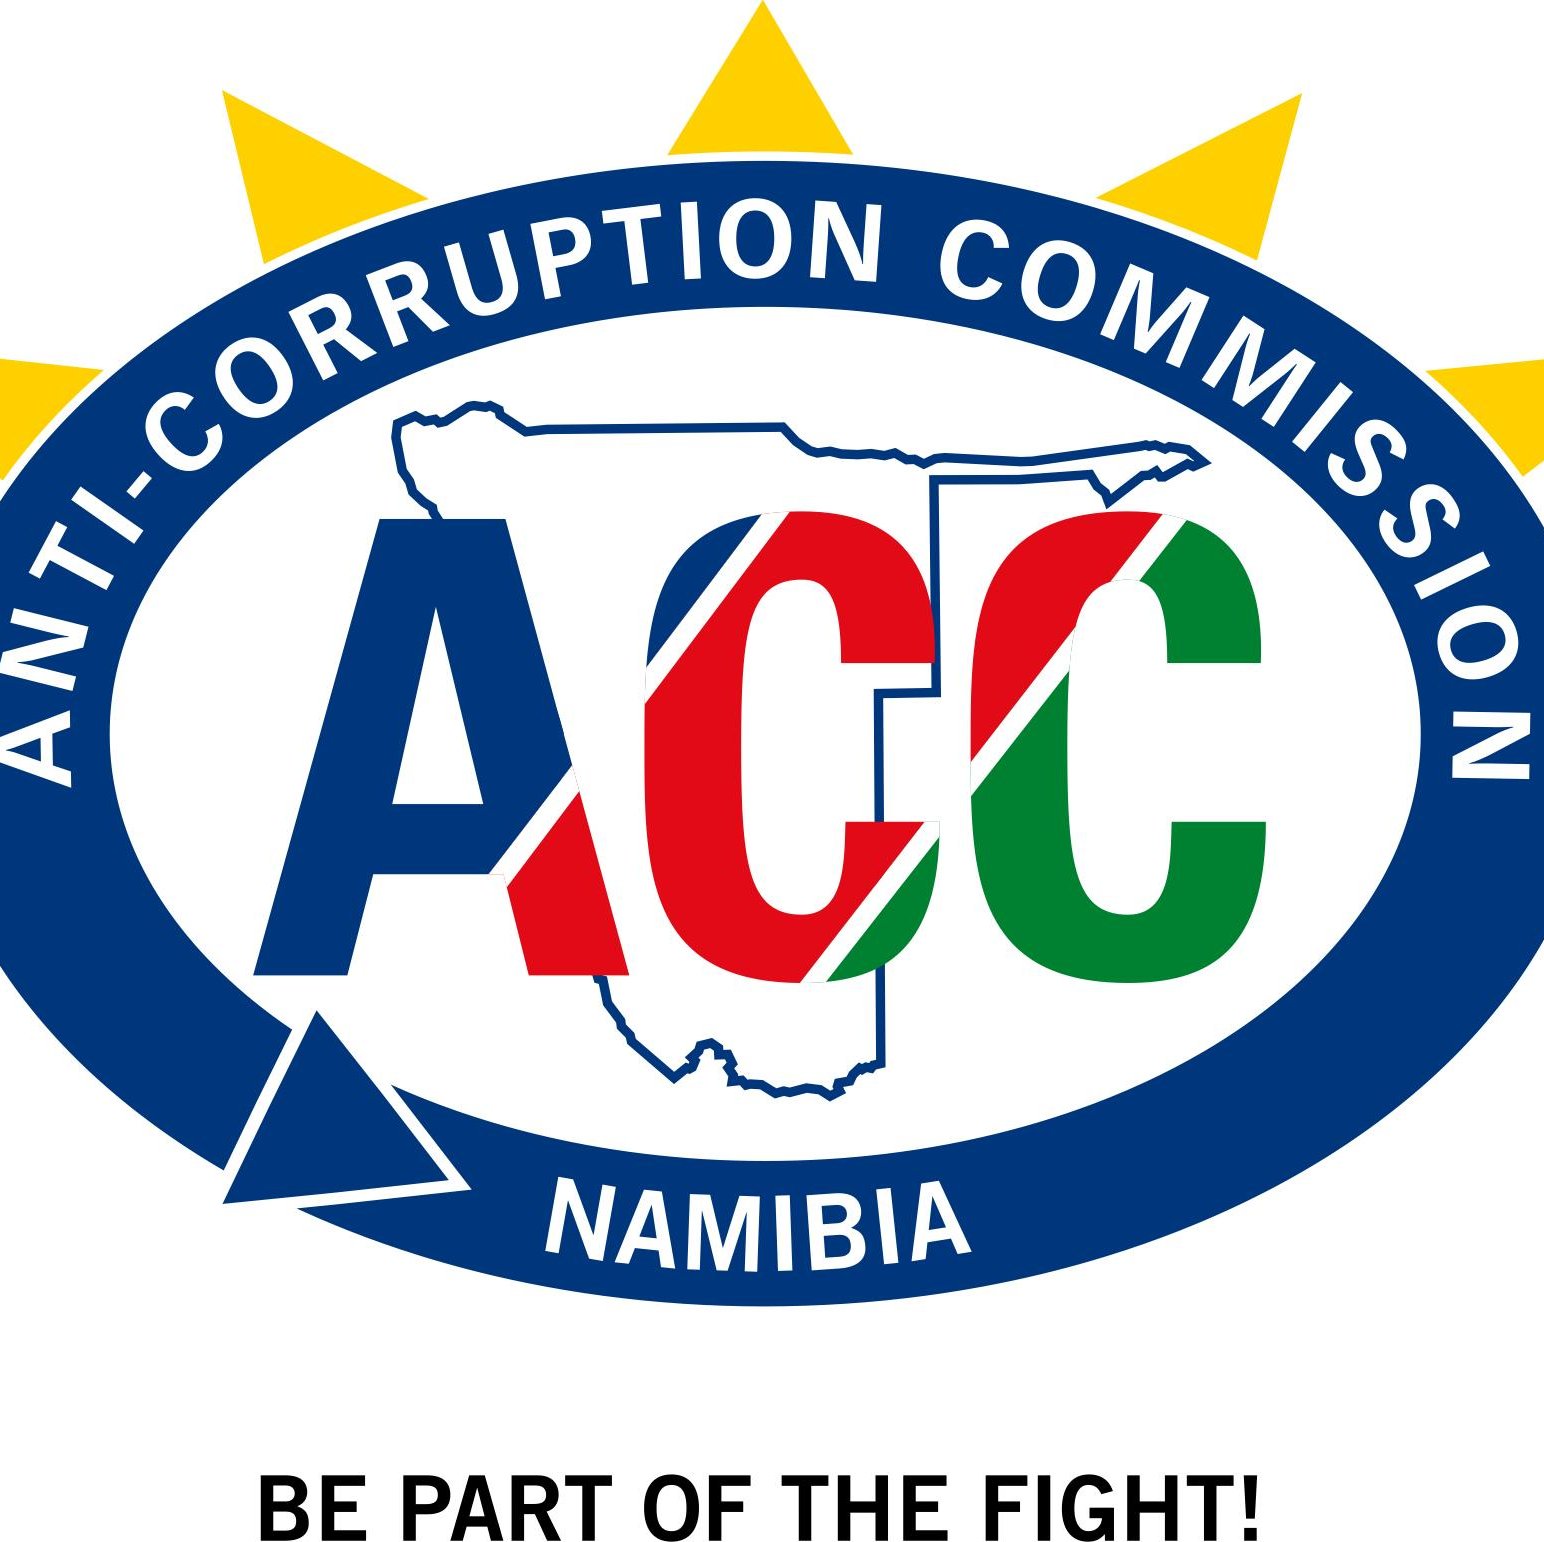 ACC is an independent agency established by an Act of Parliament, the Anti-Corruption Act, 2003 (Act No. 8 of 2003) to combat and prevent corruption in Namibia.